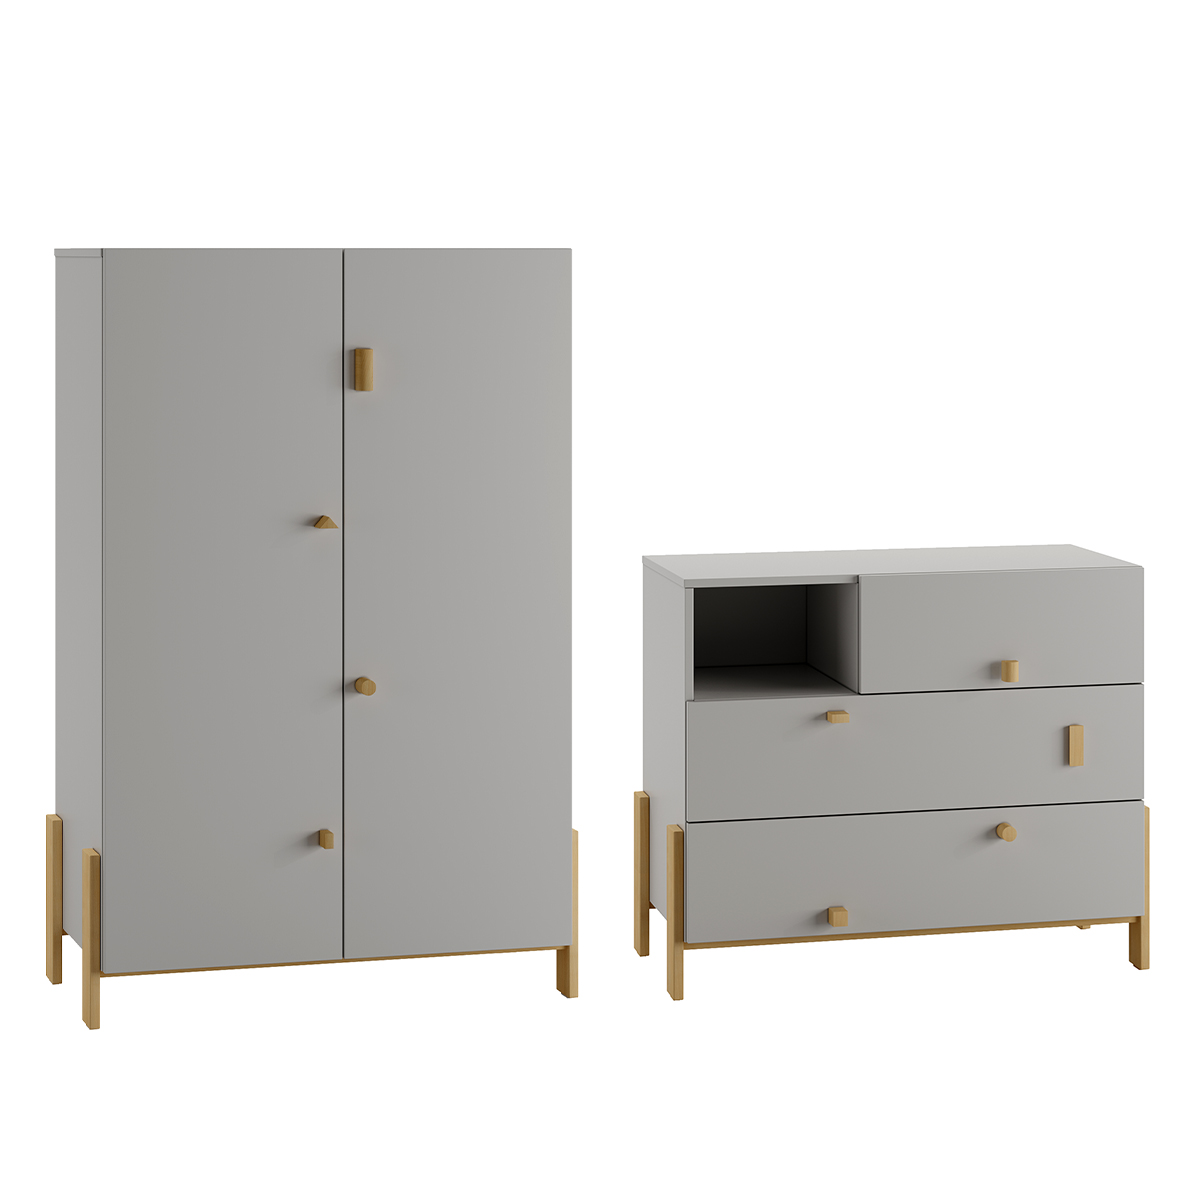 Pinio_Cube_pack_commode_armoire